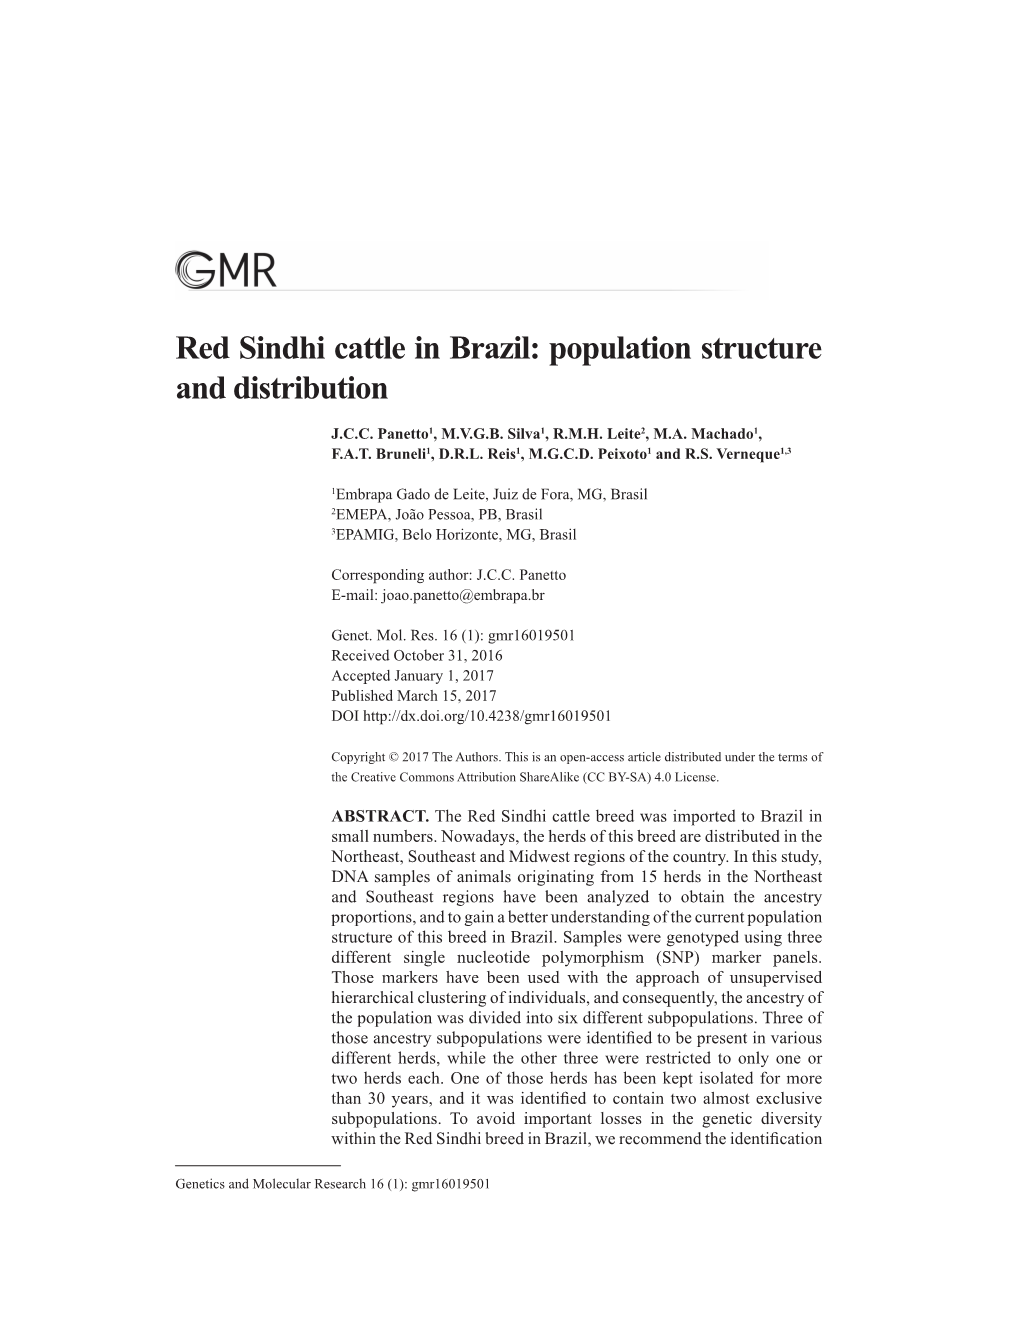 Red Sindhi Cattle in Brazil: Population Structure and Distribution